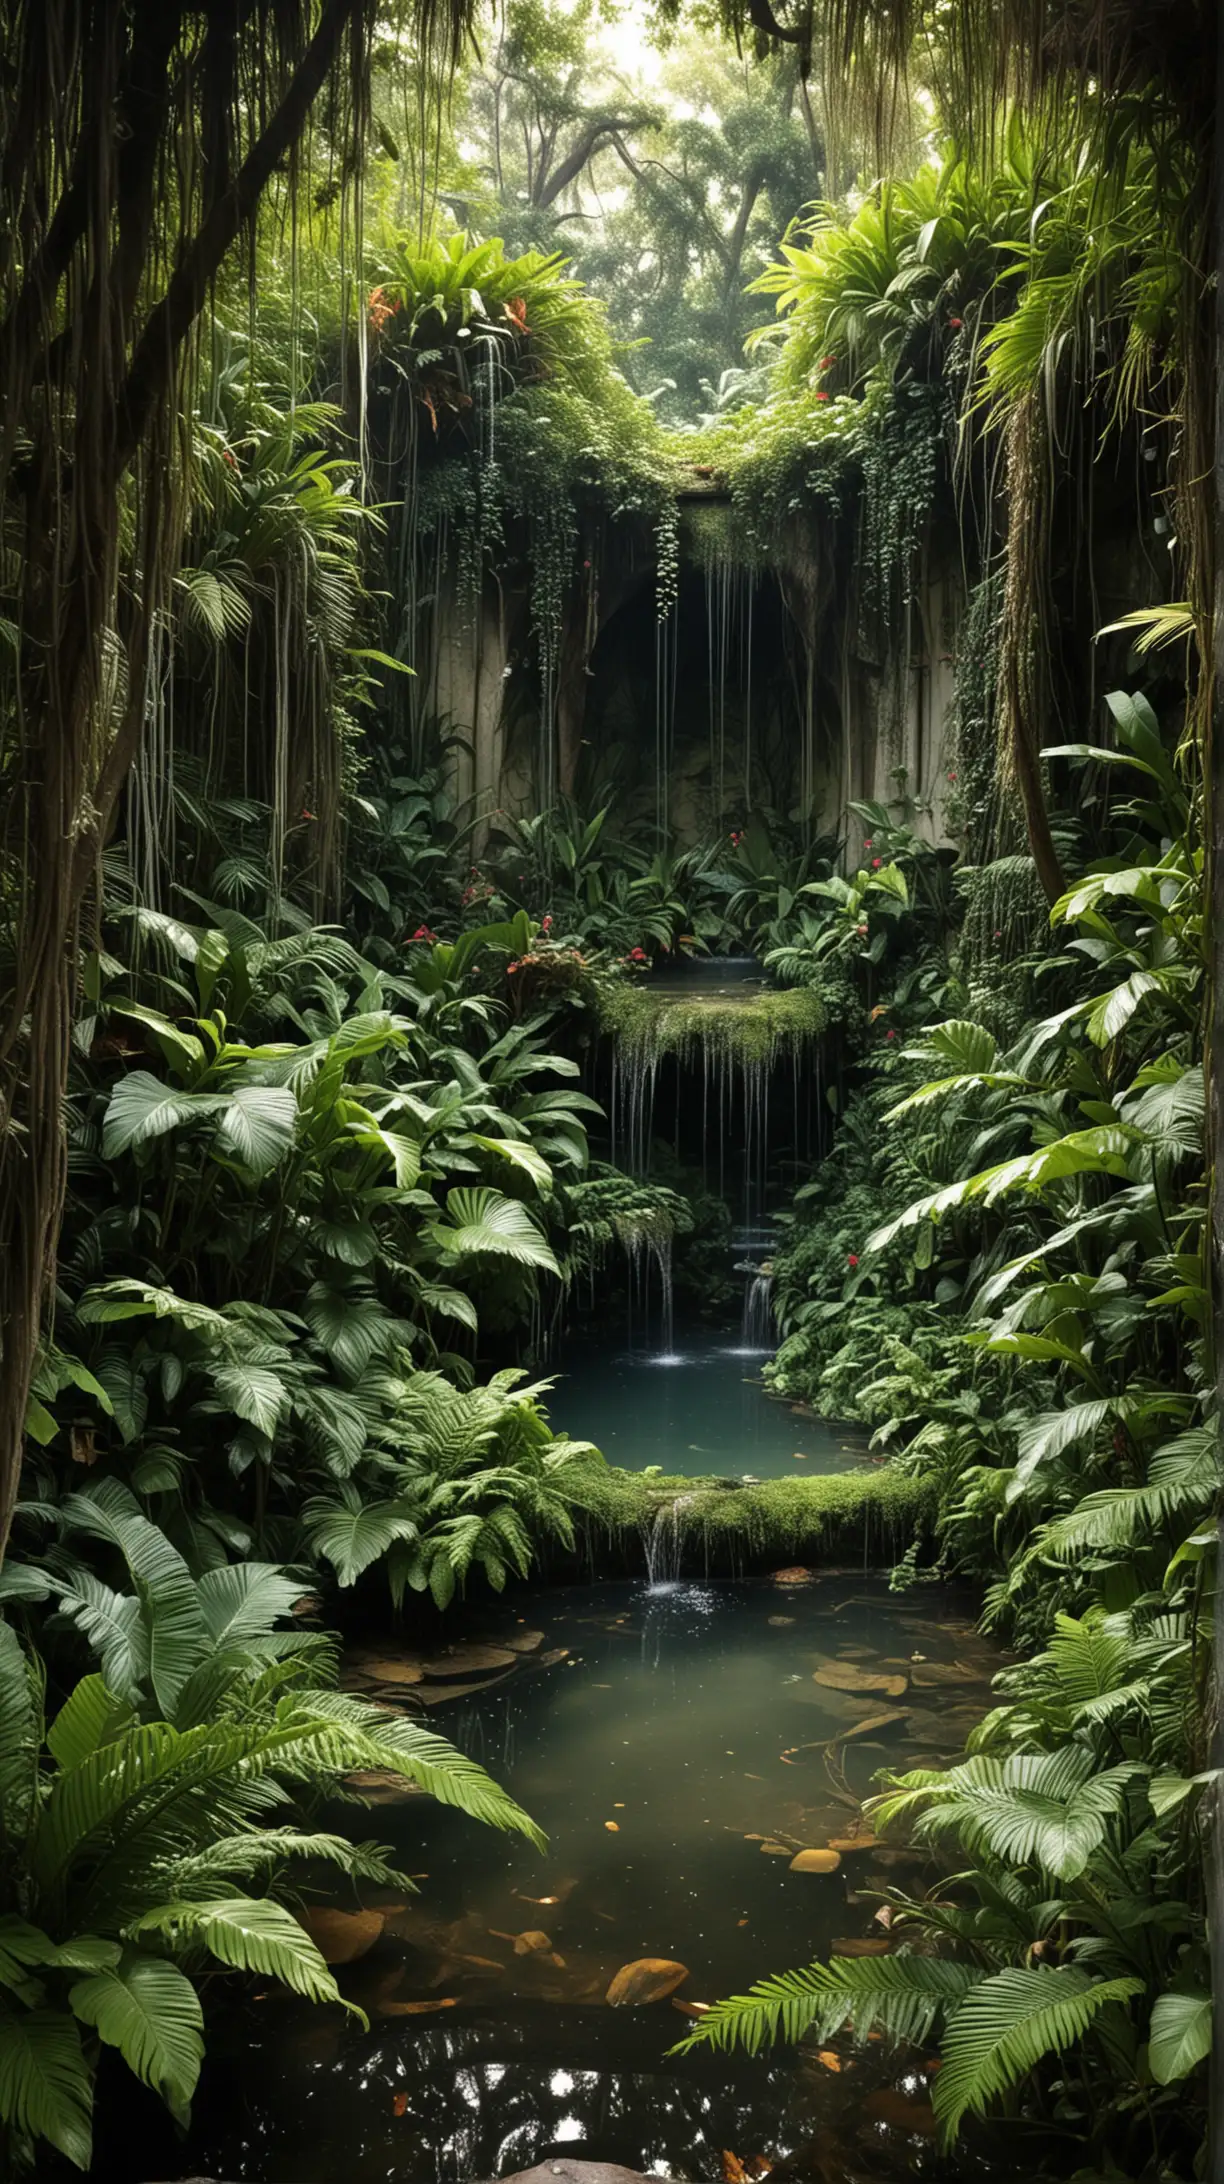 Mysterious Fountain of Youth in an Enchanting Jungle